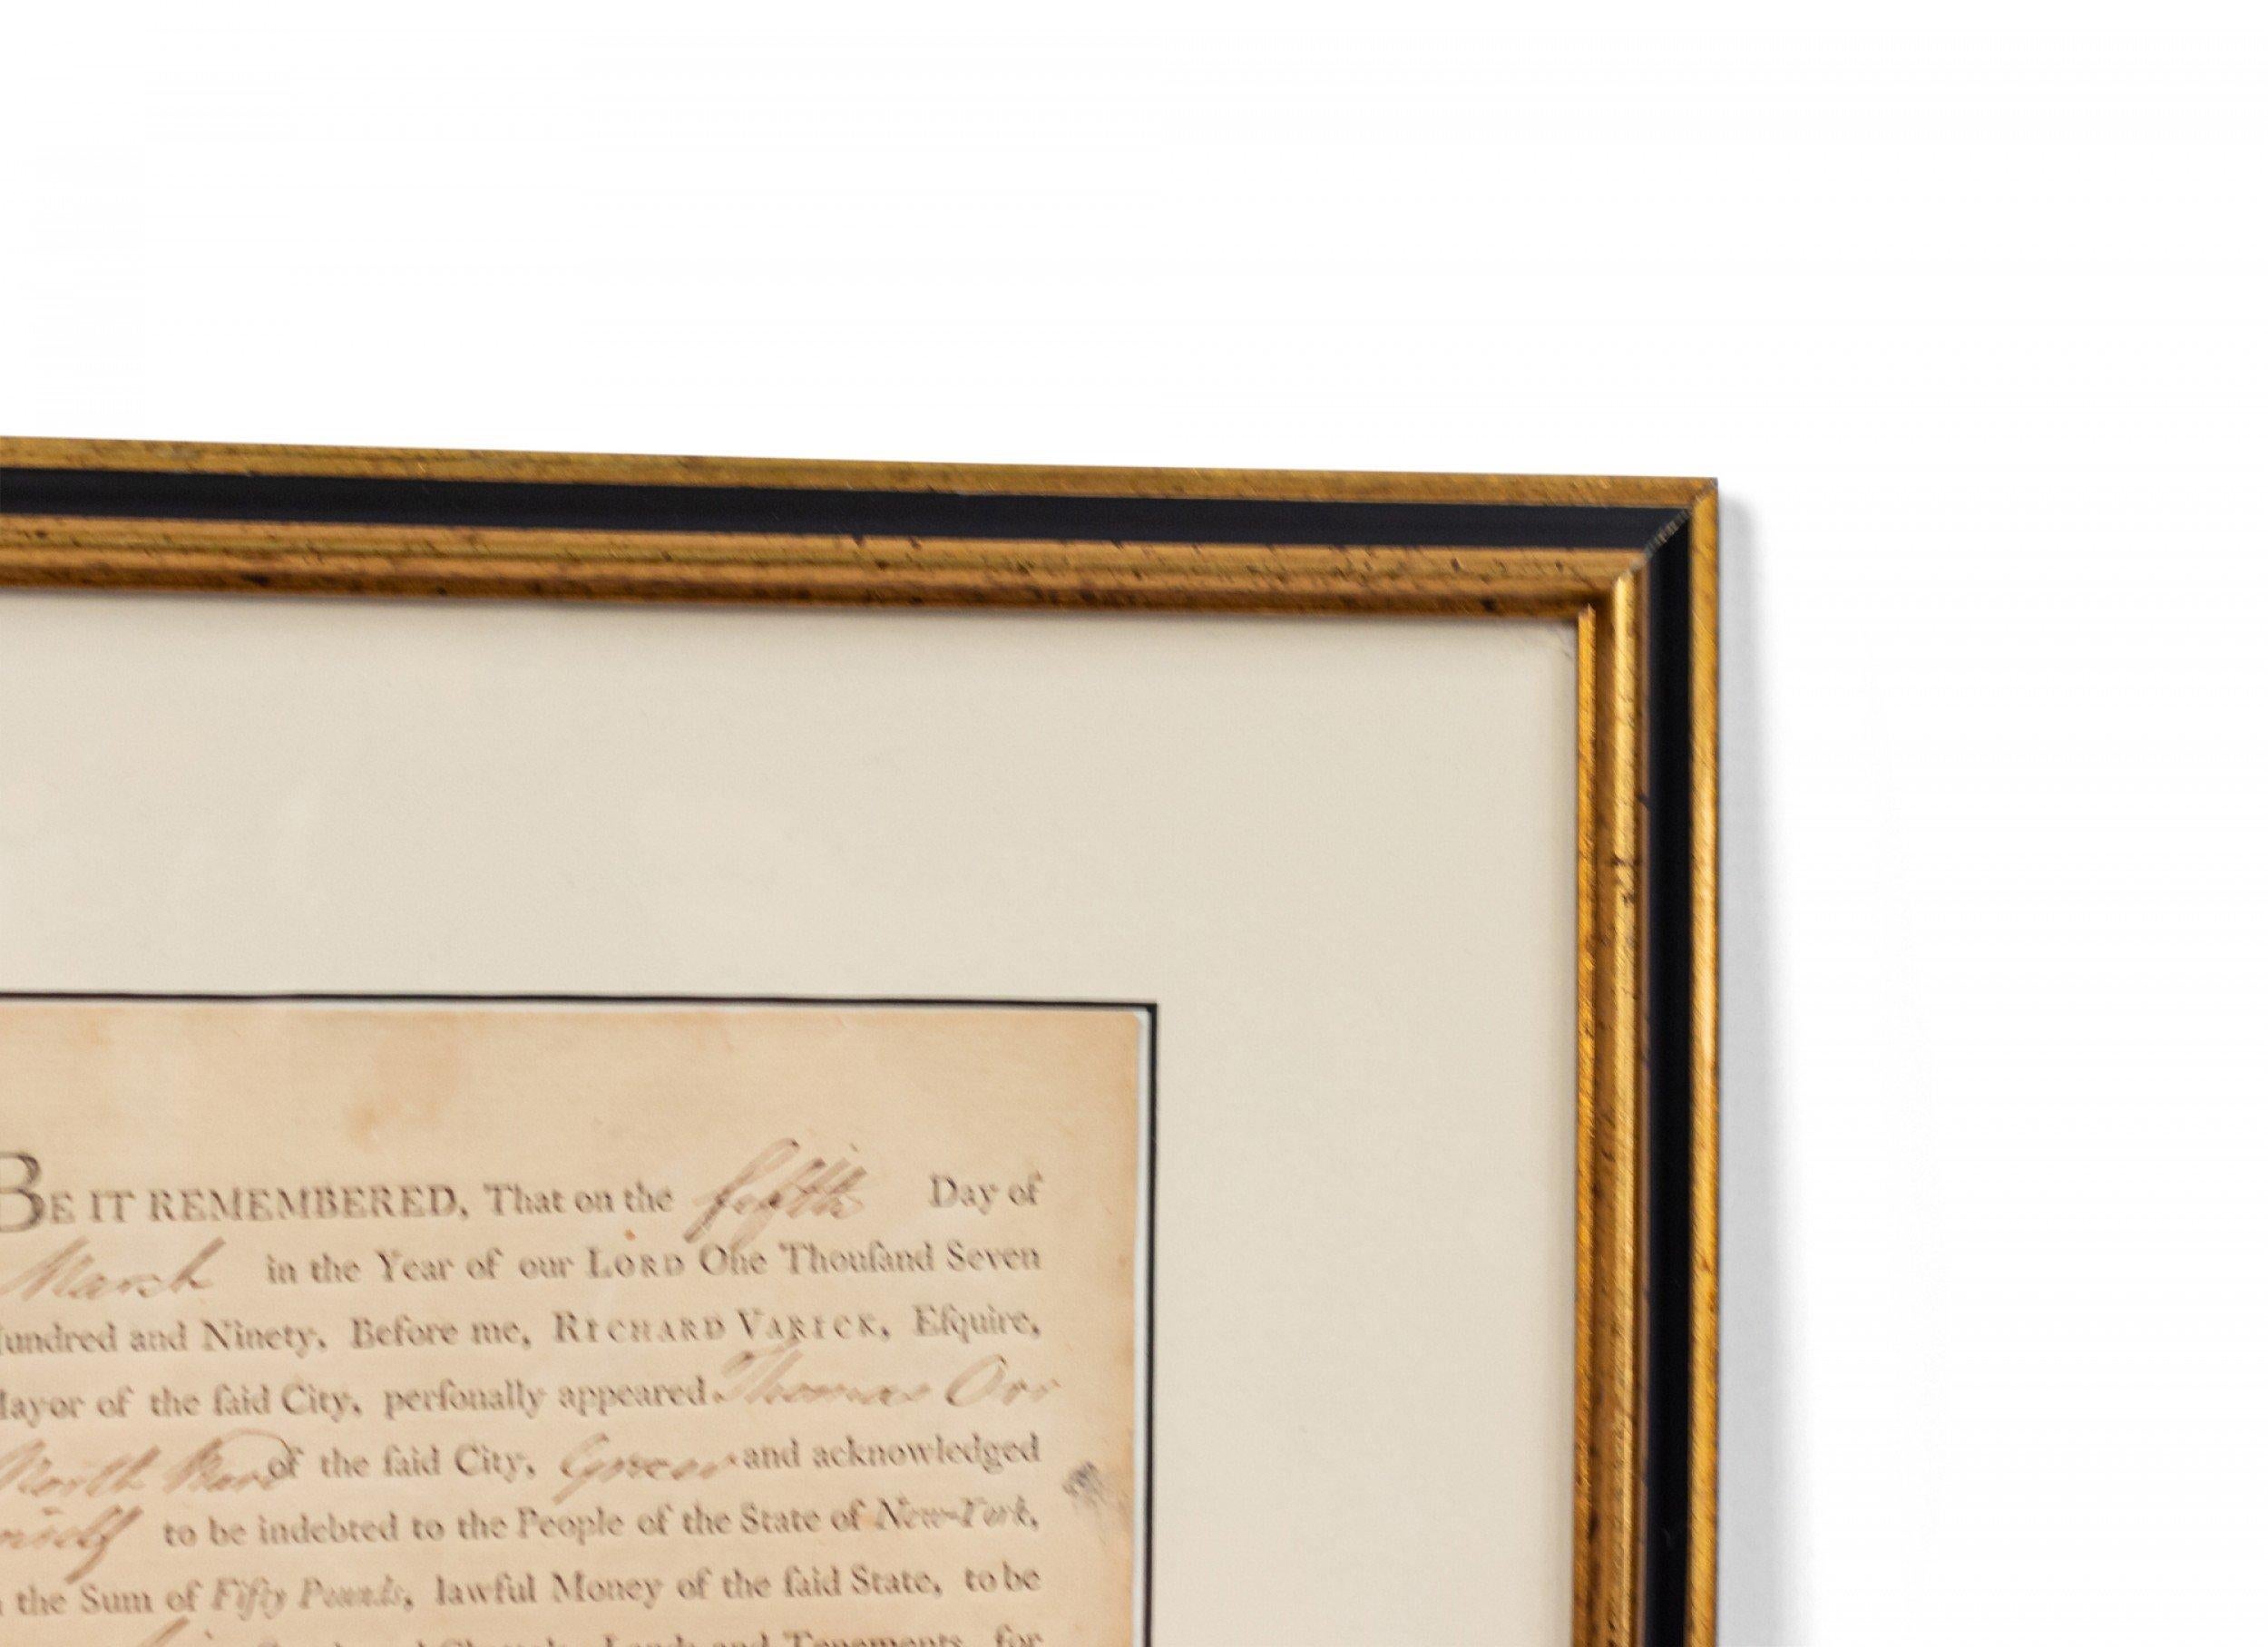 Original 1790 NY state inn license letterpressed in a faux gilt and lacquer frame.
    